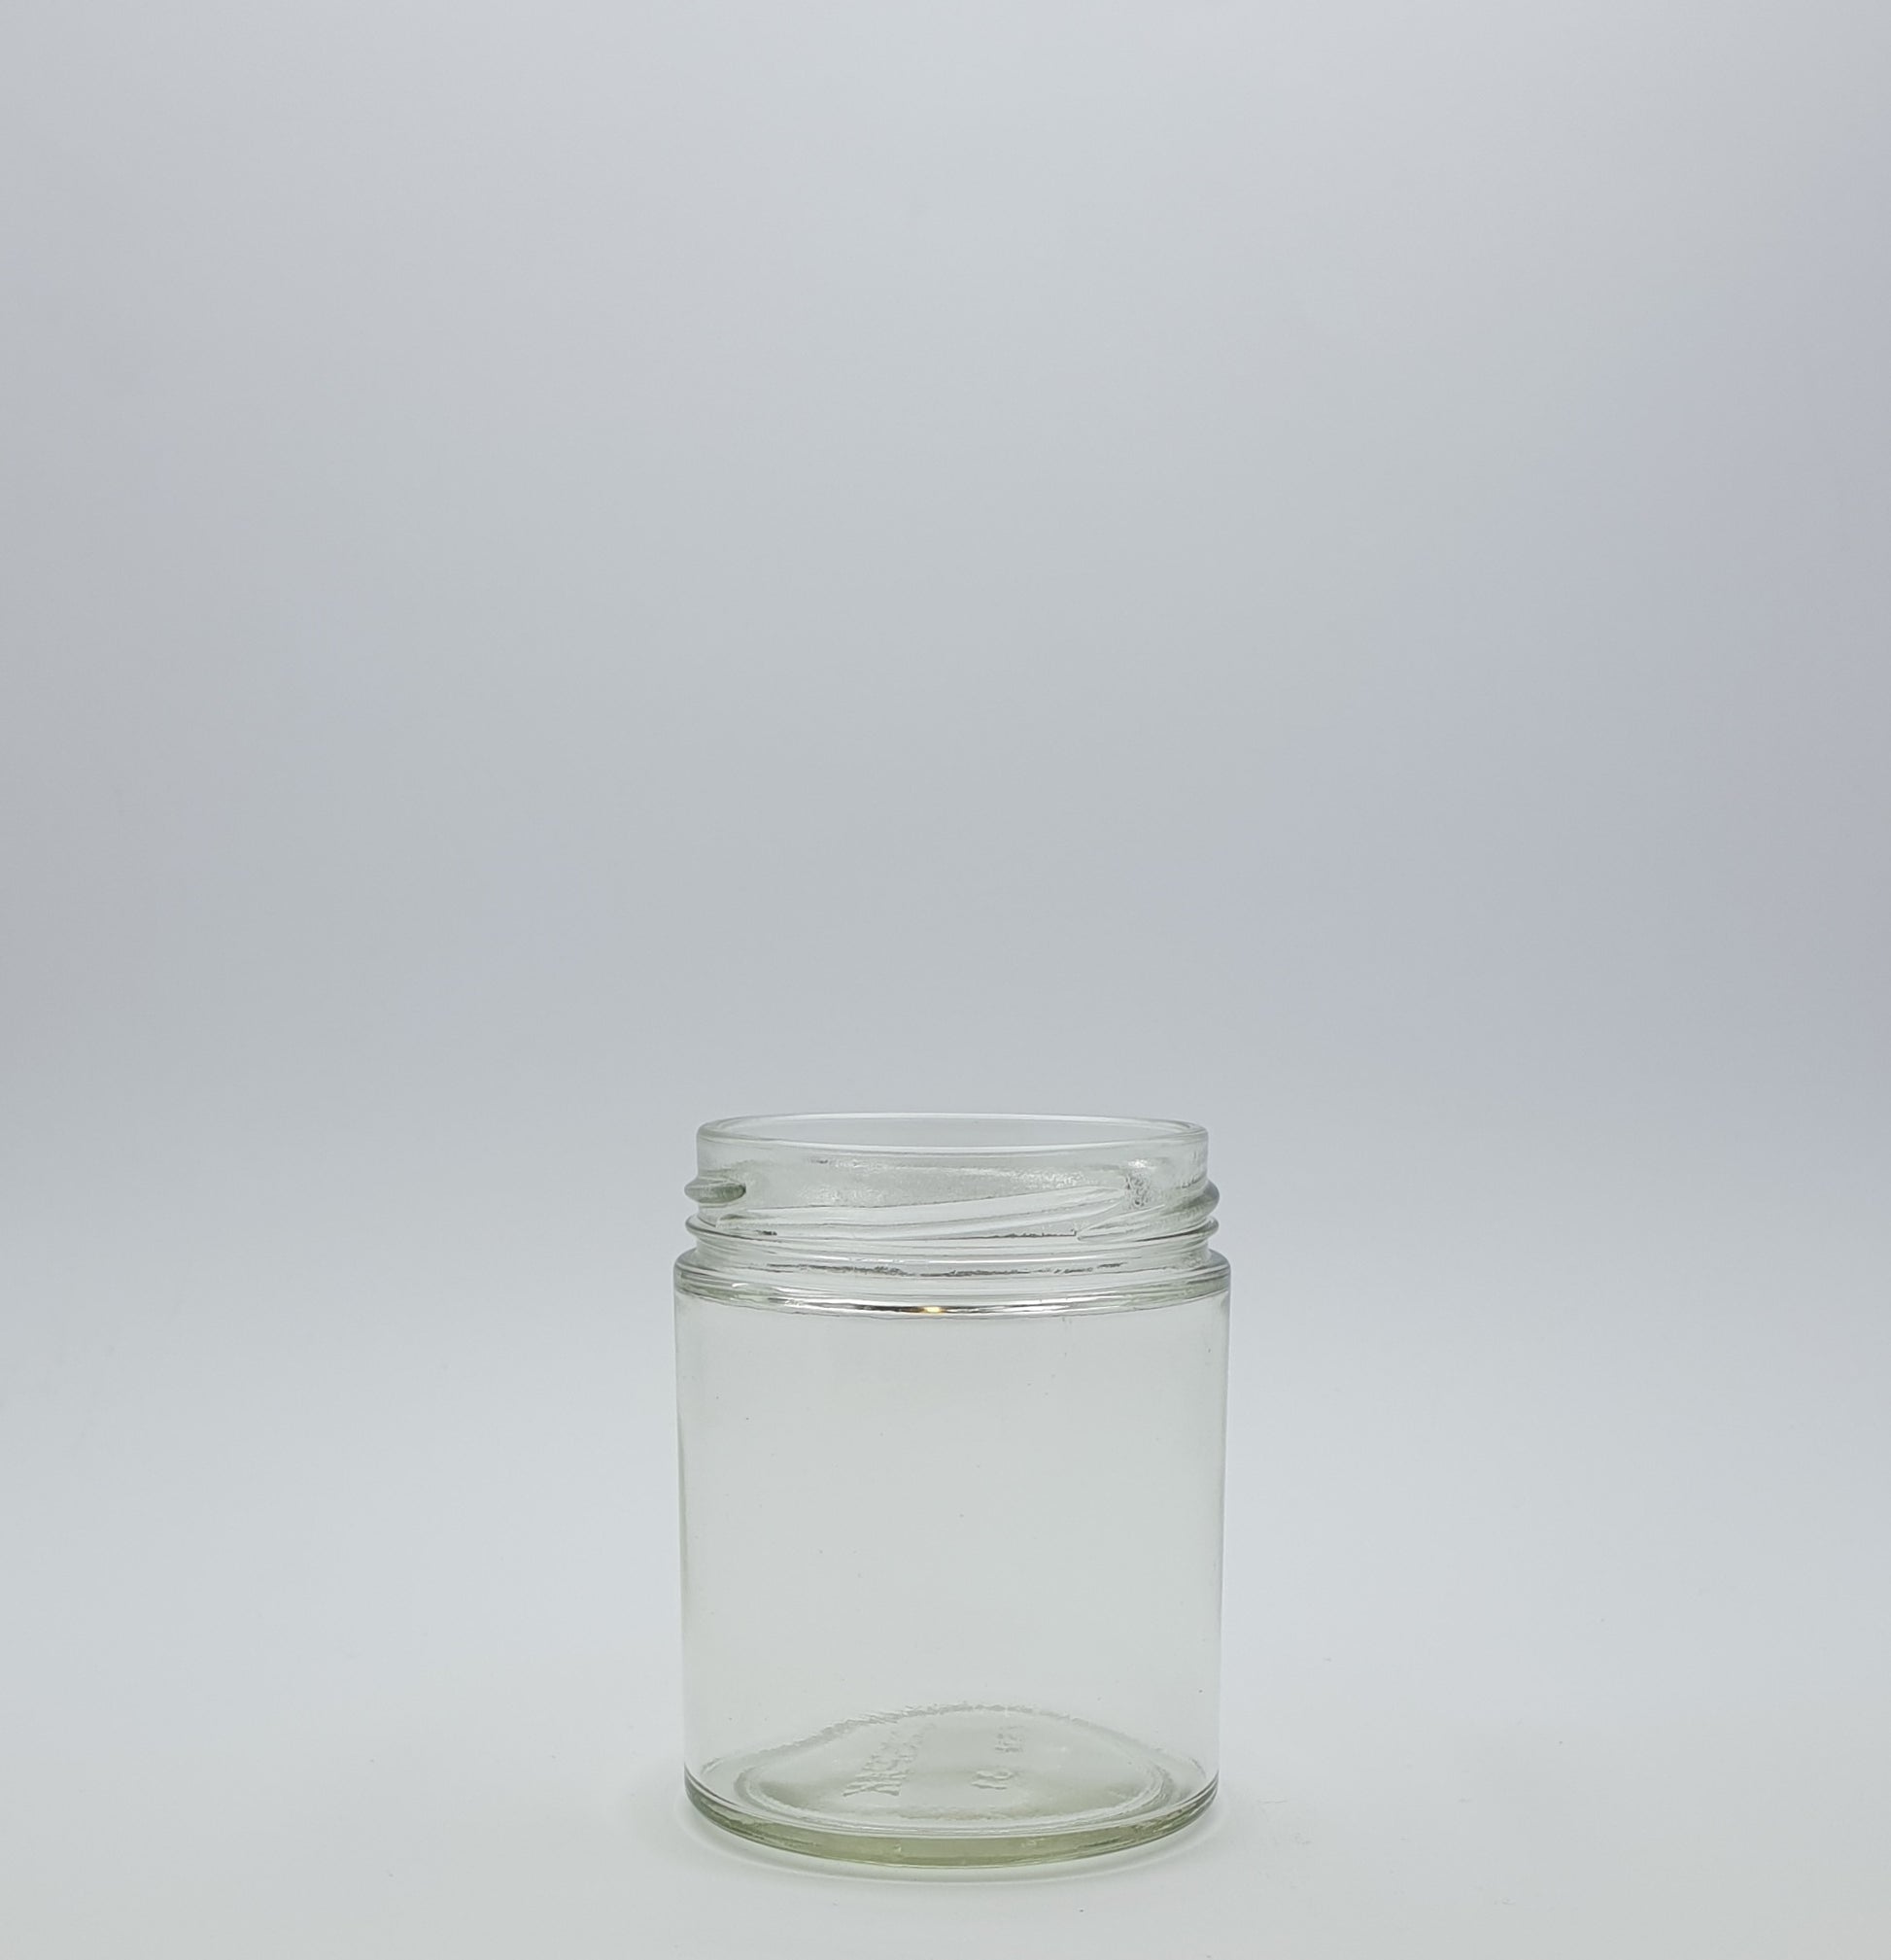 190ml Panelled Round Glass Jar without a lid. 